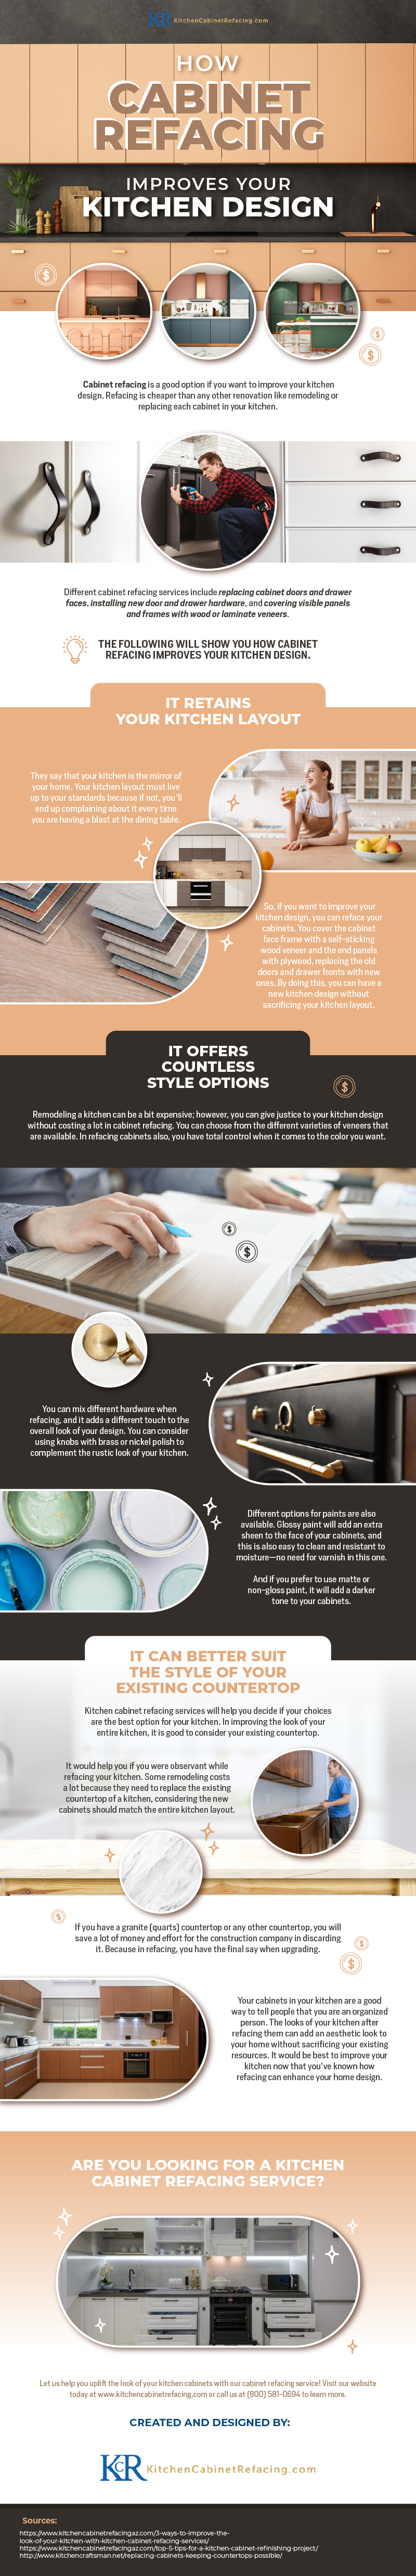 How_Cabinet_Refacing_Improves_your_Kitchen_Design_infographic_image